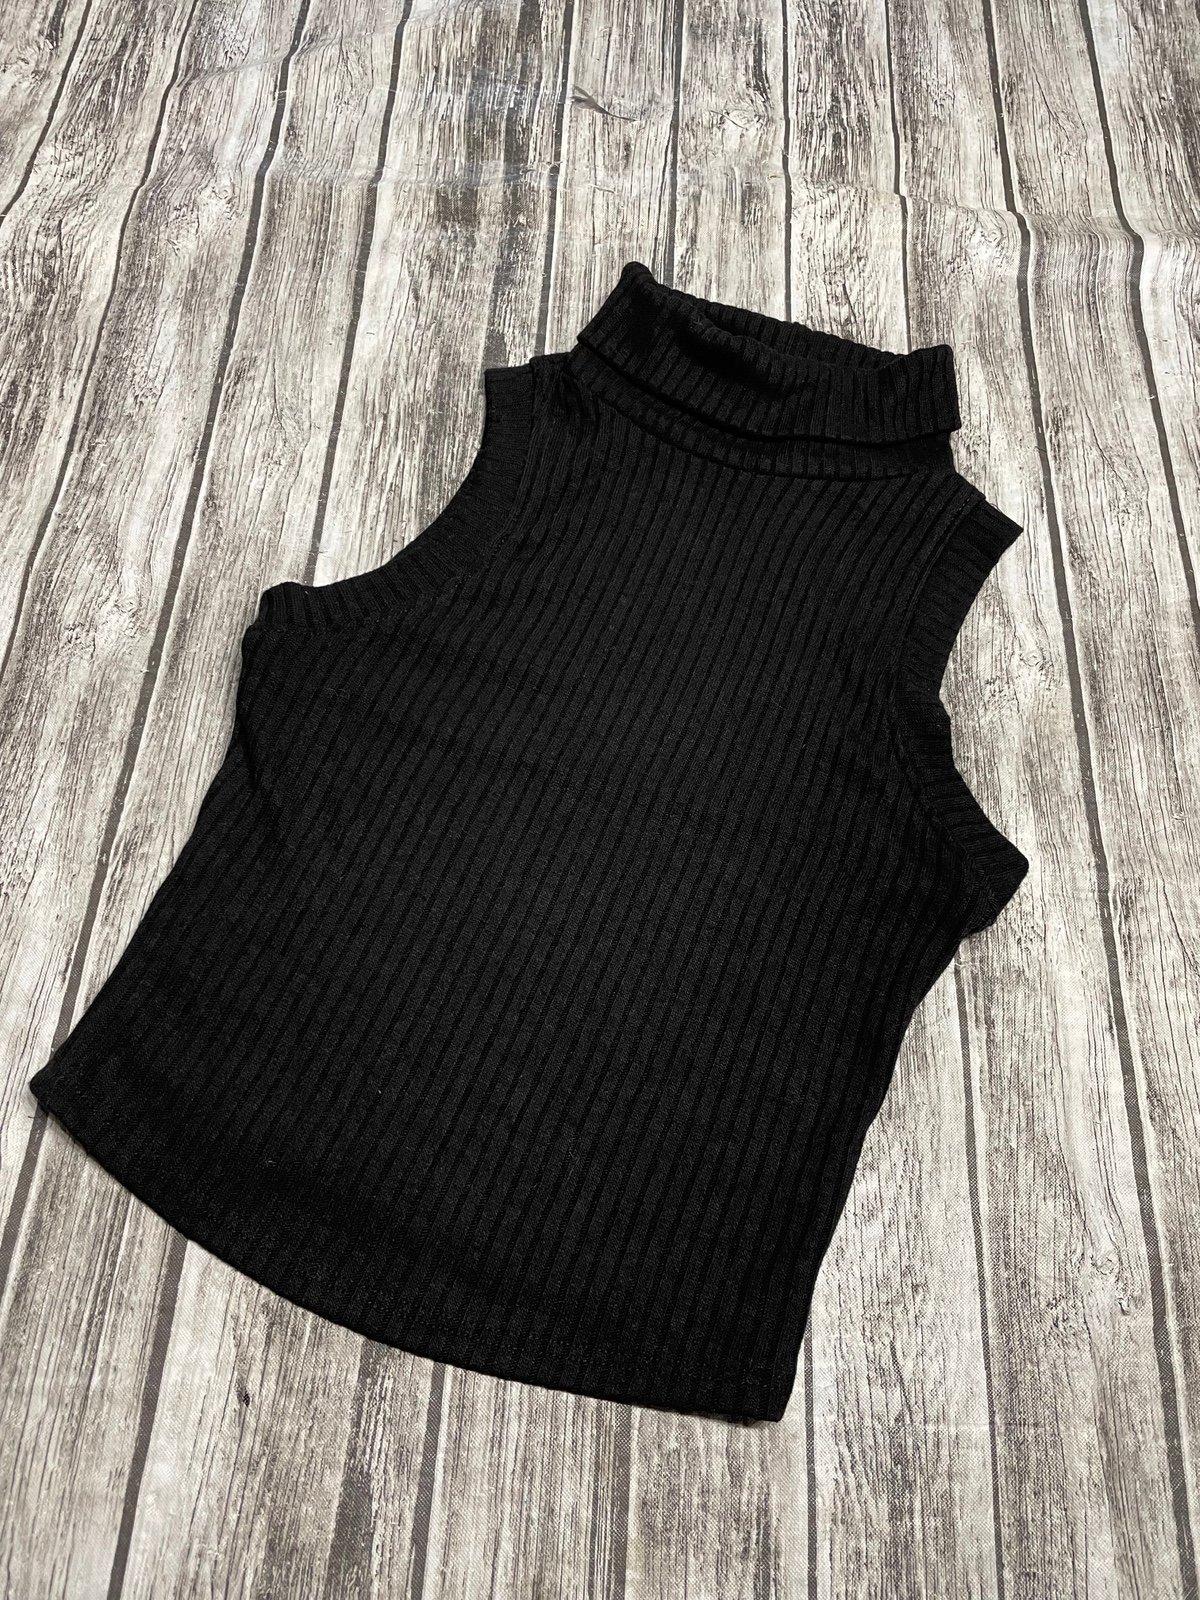 The Best Seller Ladies small Bozzolo black ribbed sleeveless knit top with turtle neck excellent PdETj2fhm Counter Genuine 